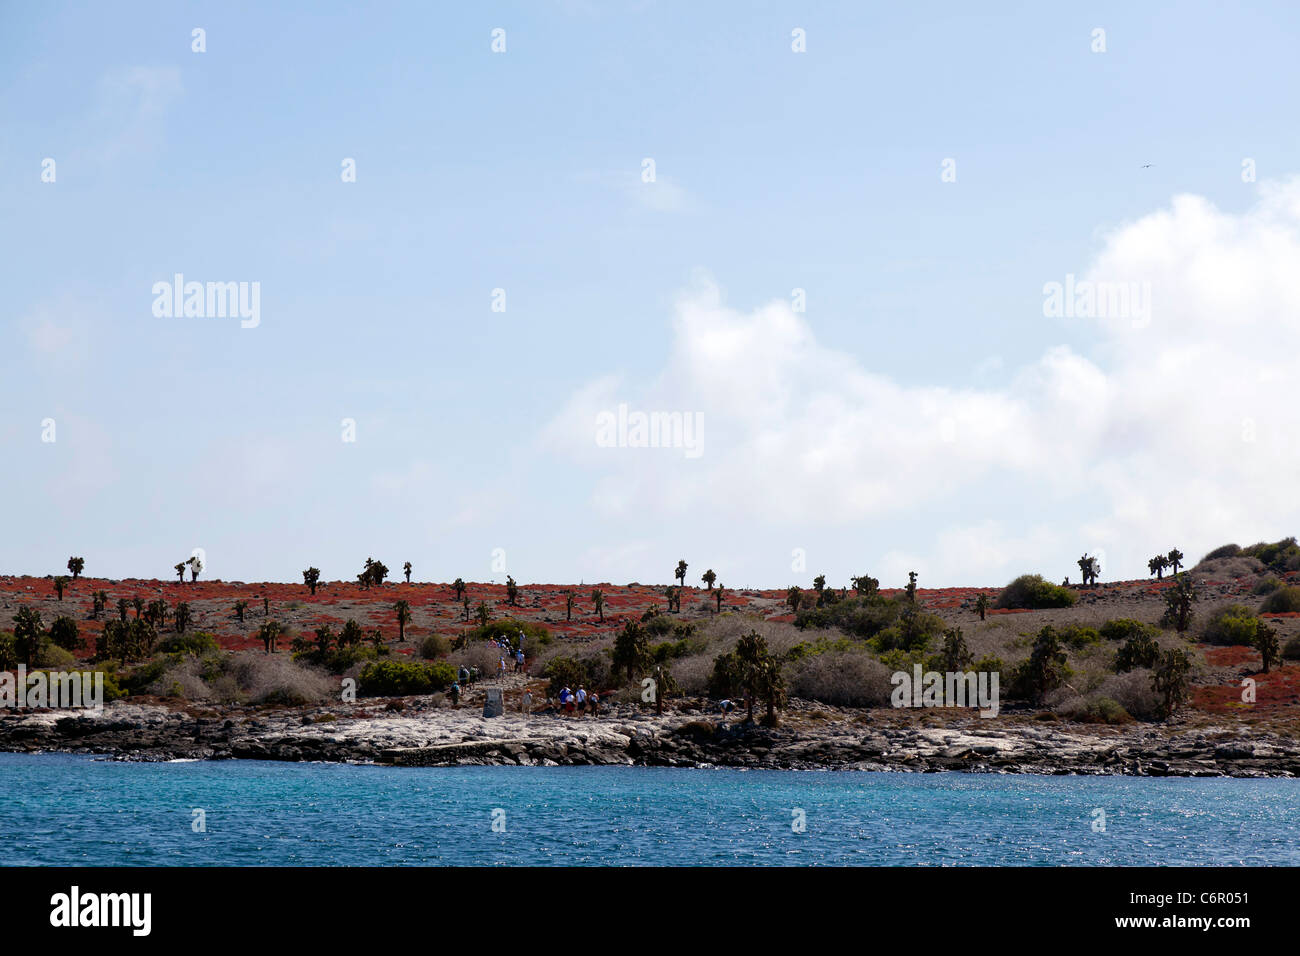 Tourists at the rocky landing site at North Seymour, Galapagos Islands Stock Photo